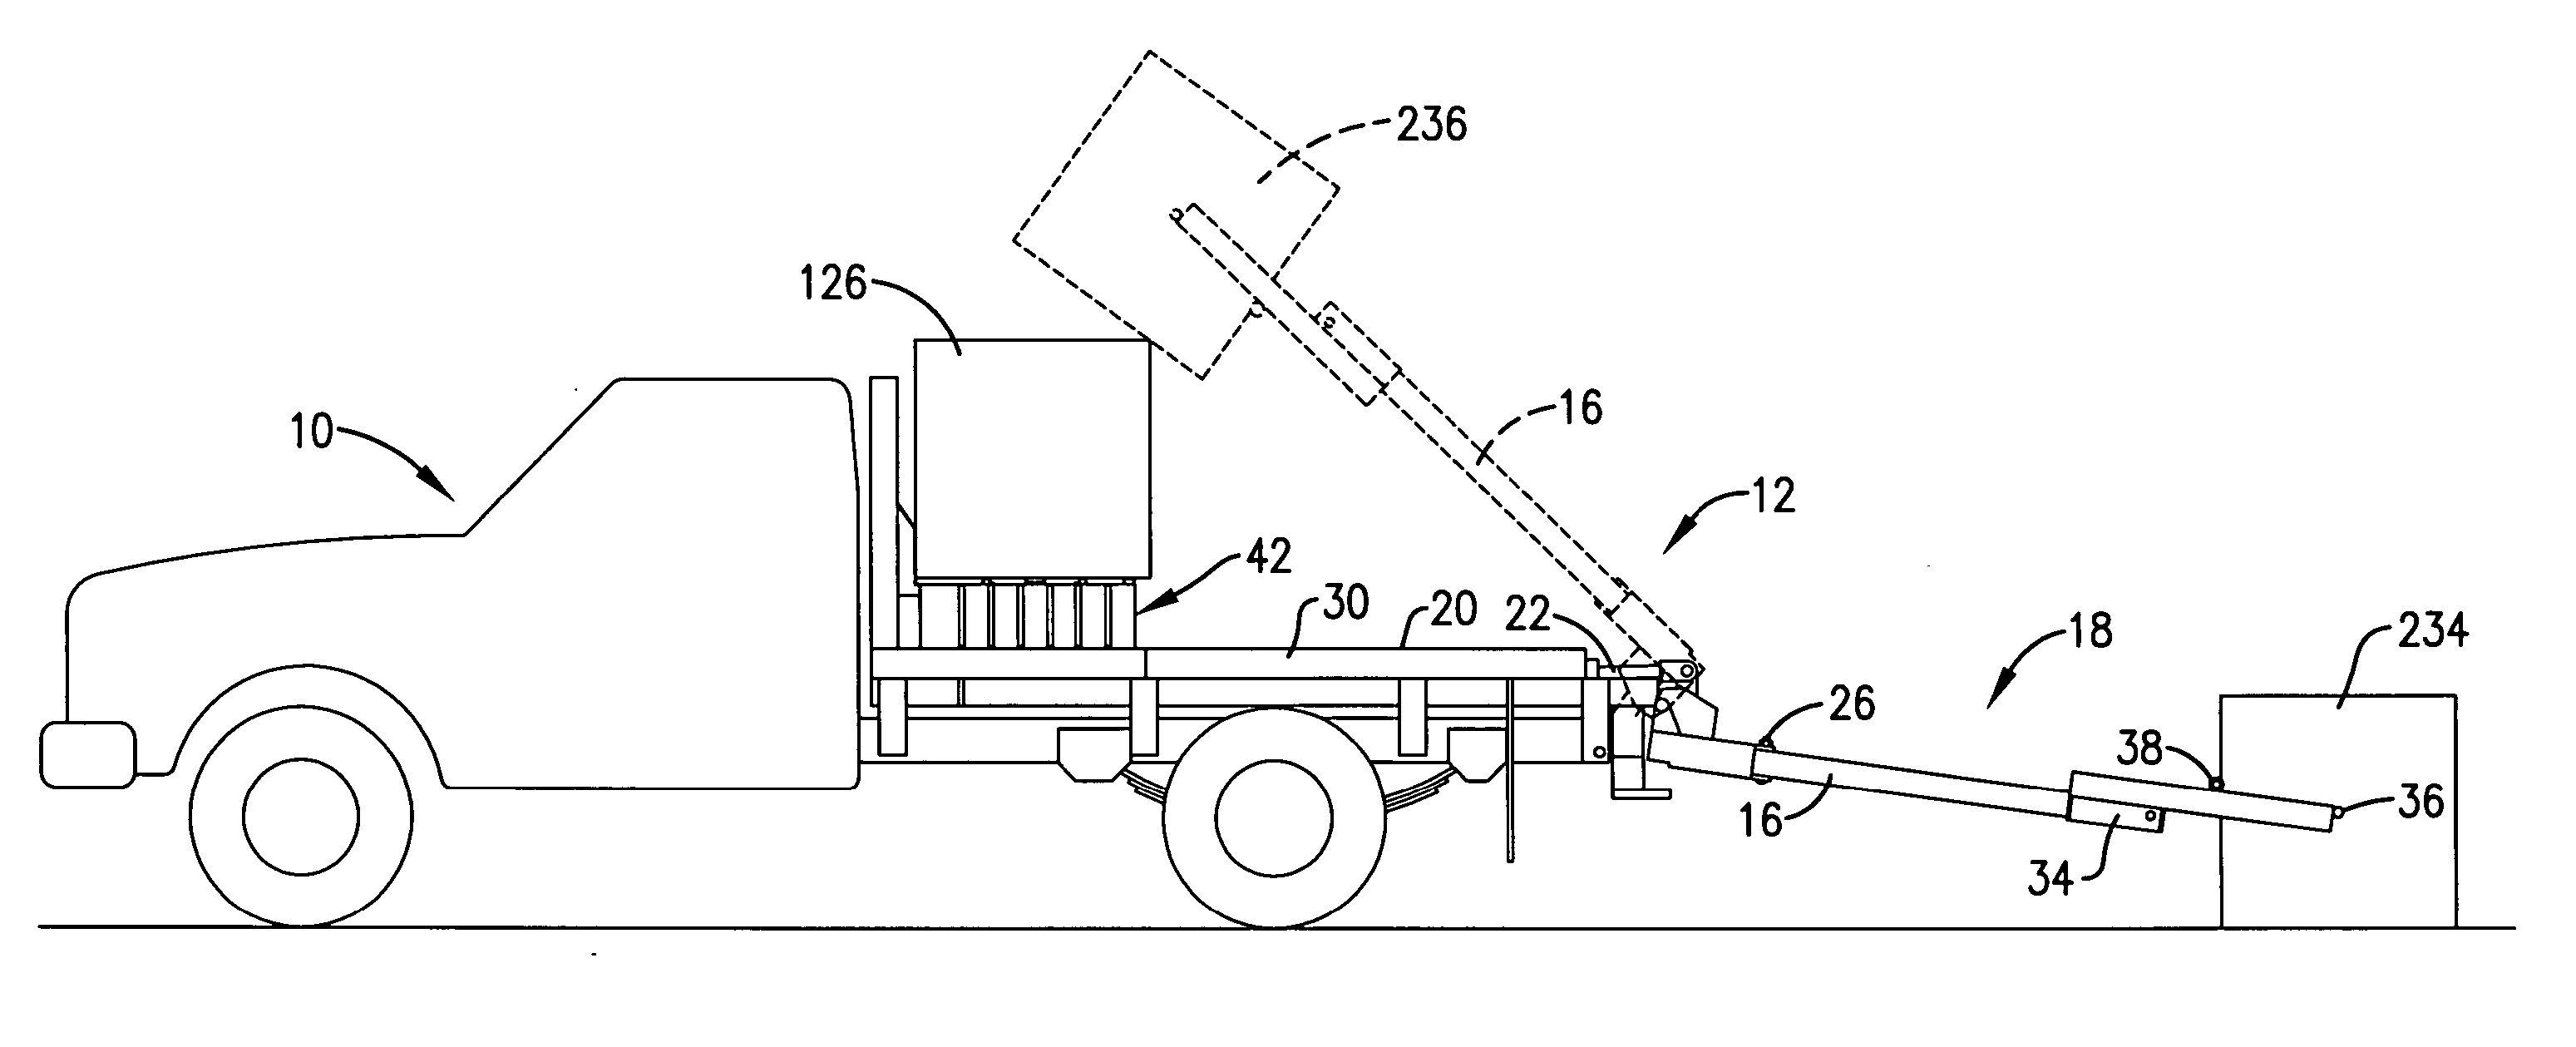 Square bale feeder attachment for flat-bed vehicles